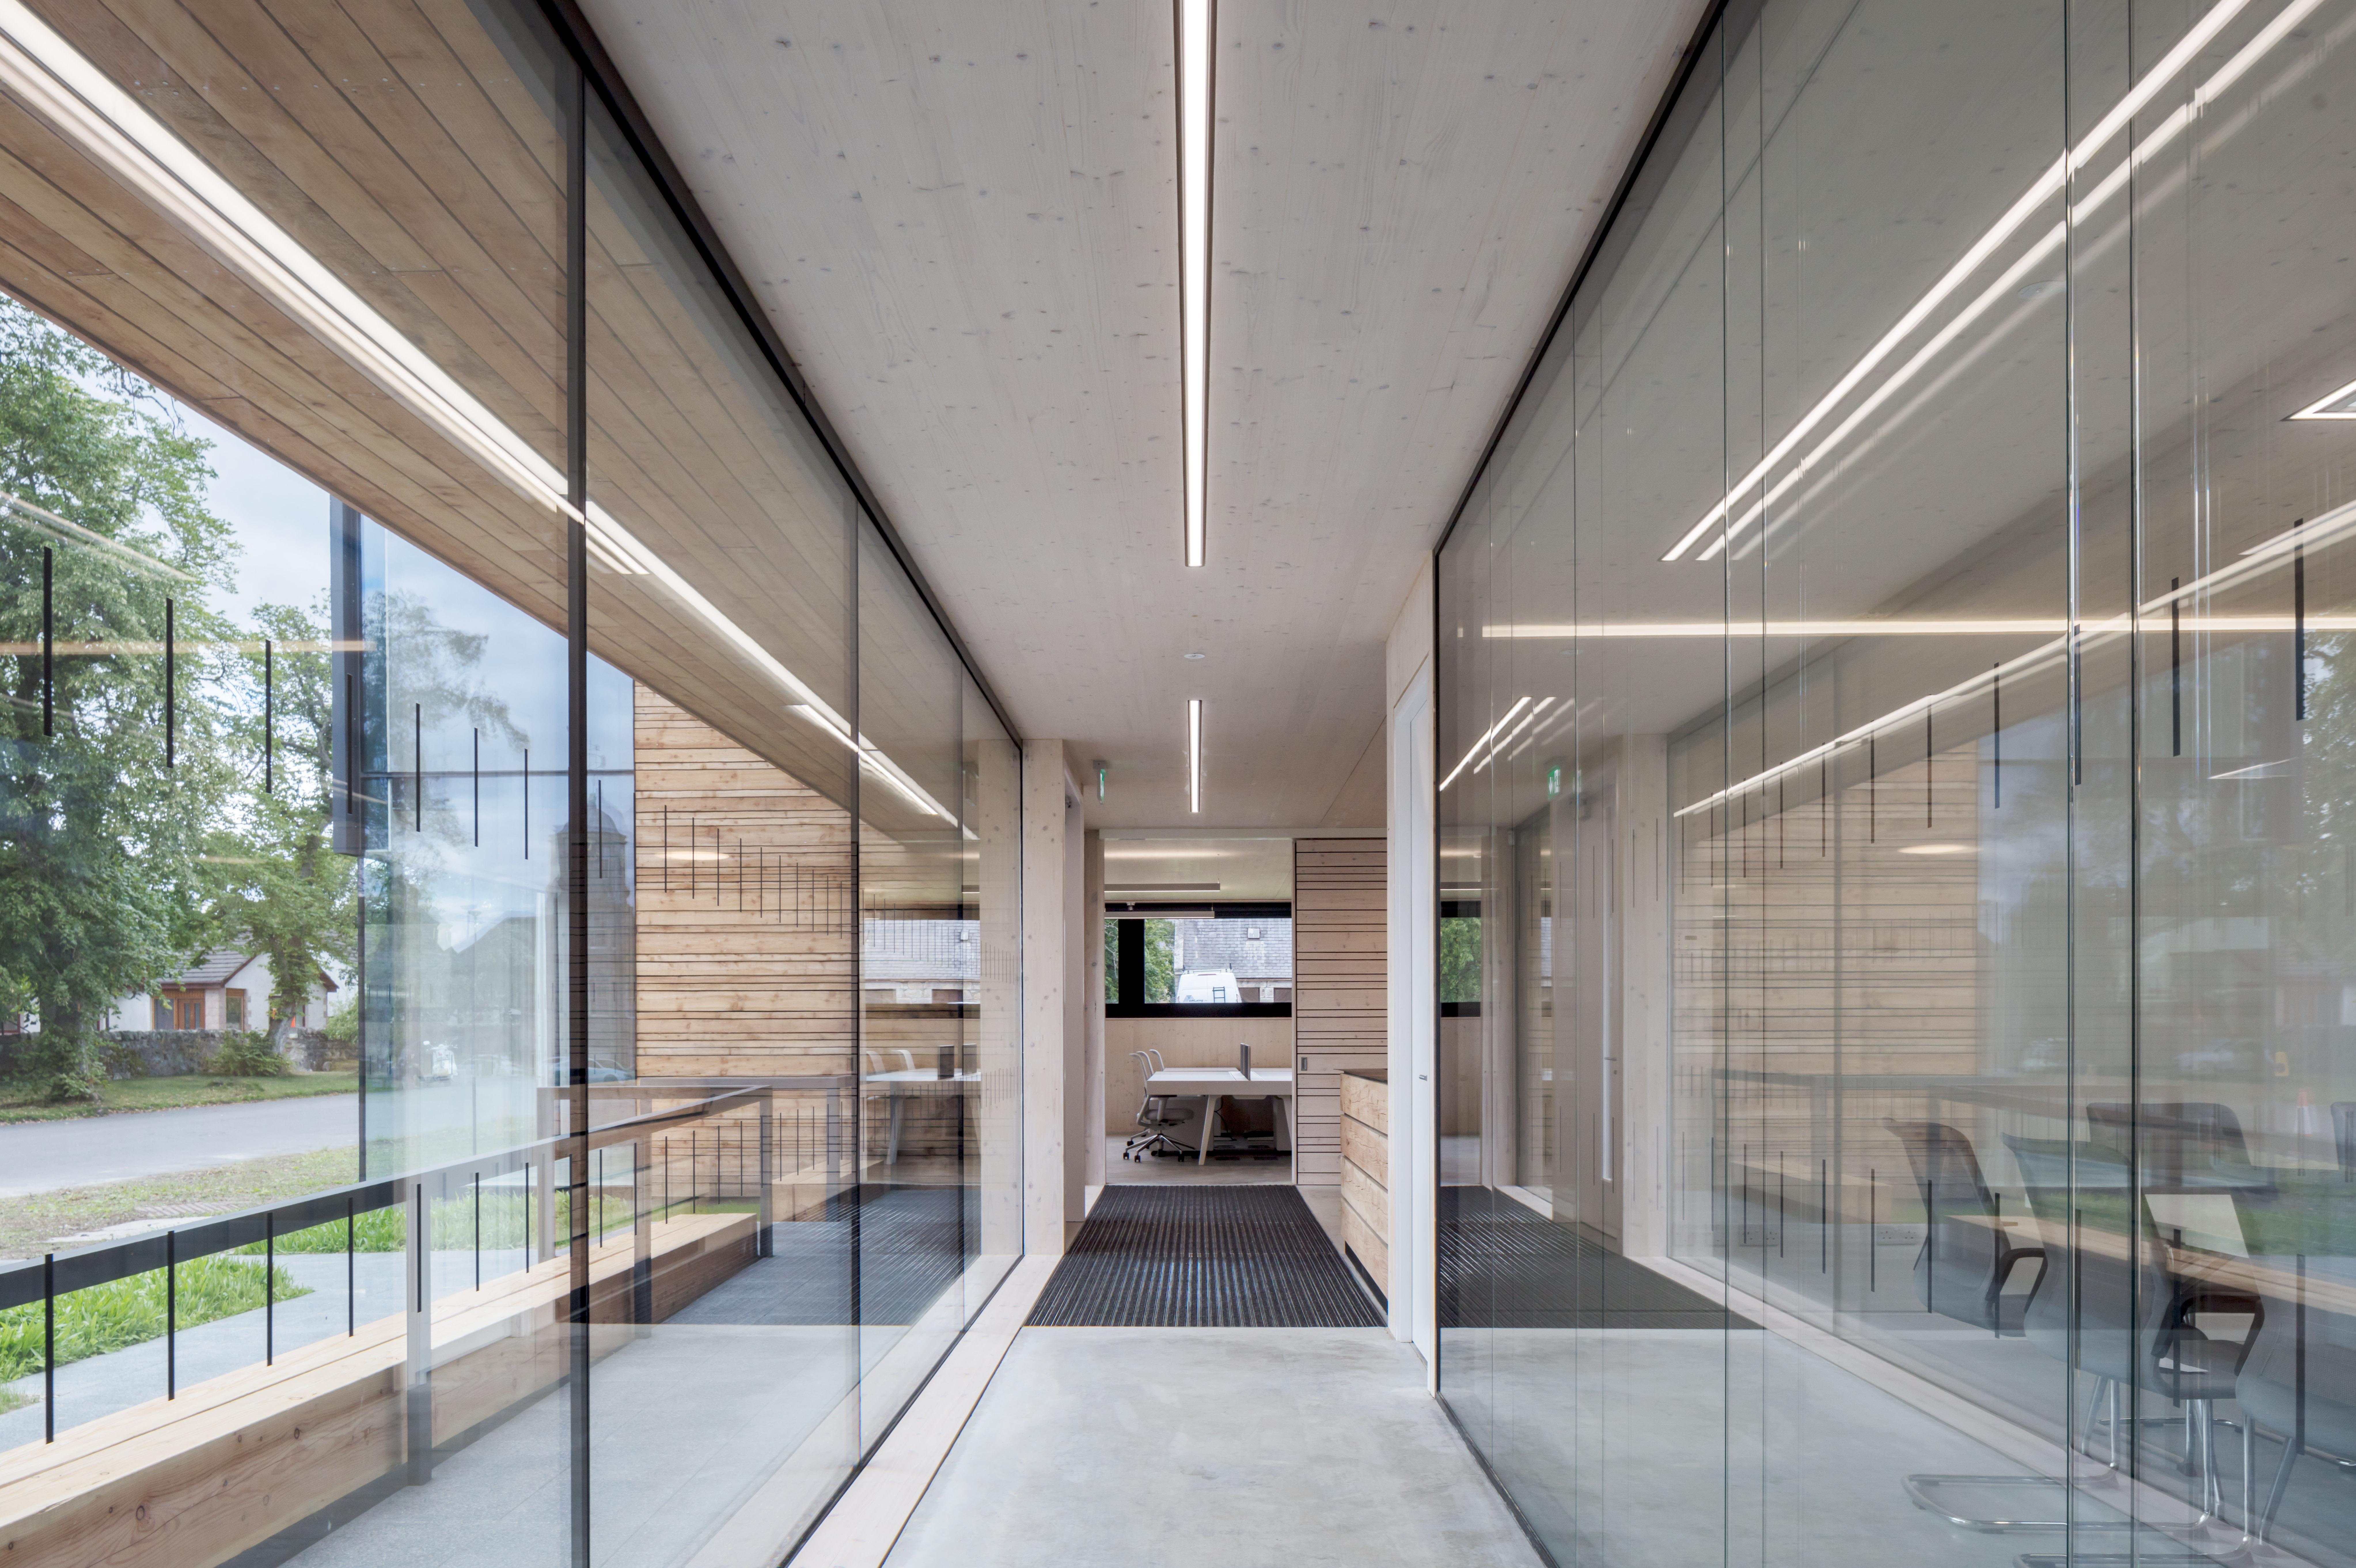 Moxon completes contemporary addition to Cairngorms National Park Authority’s HQ